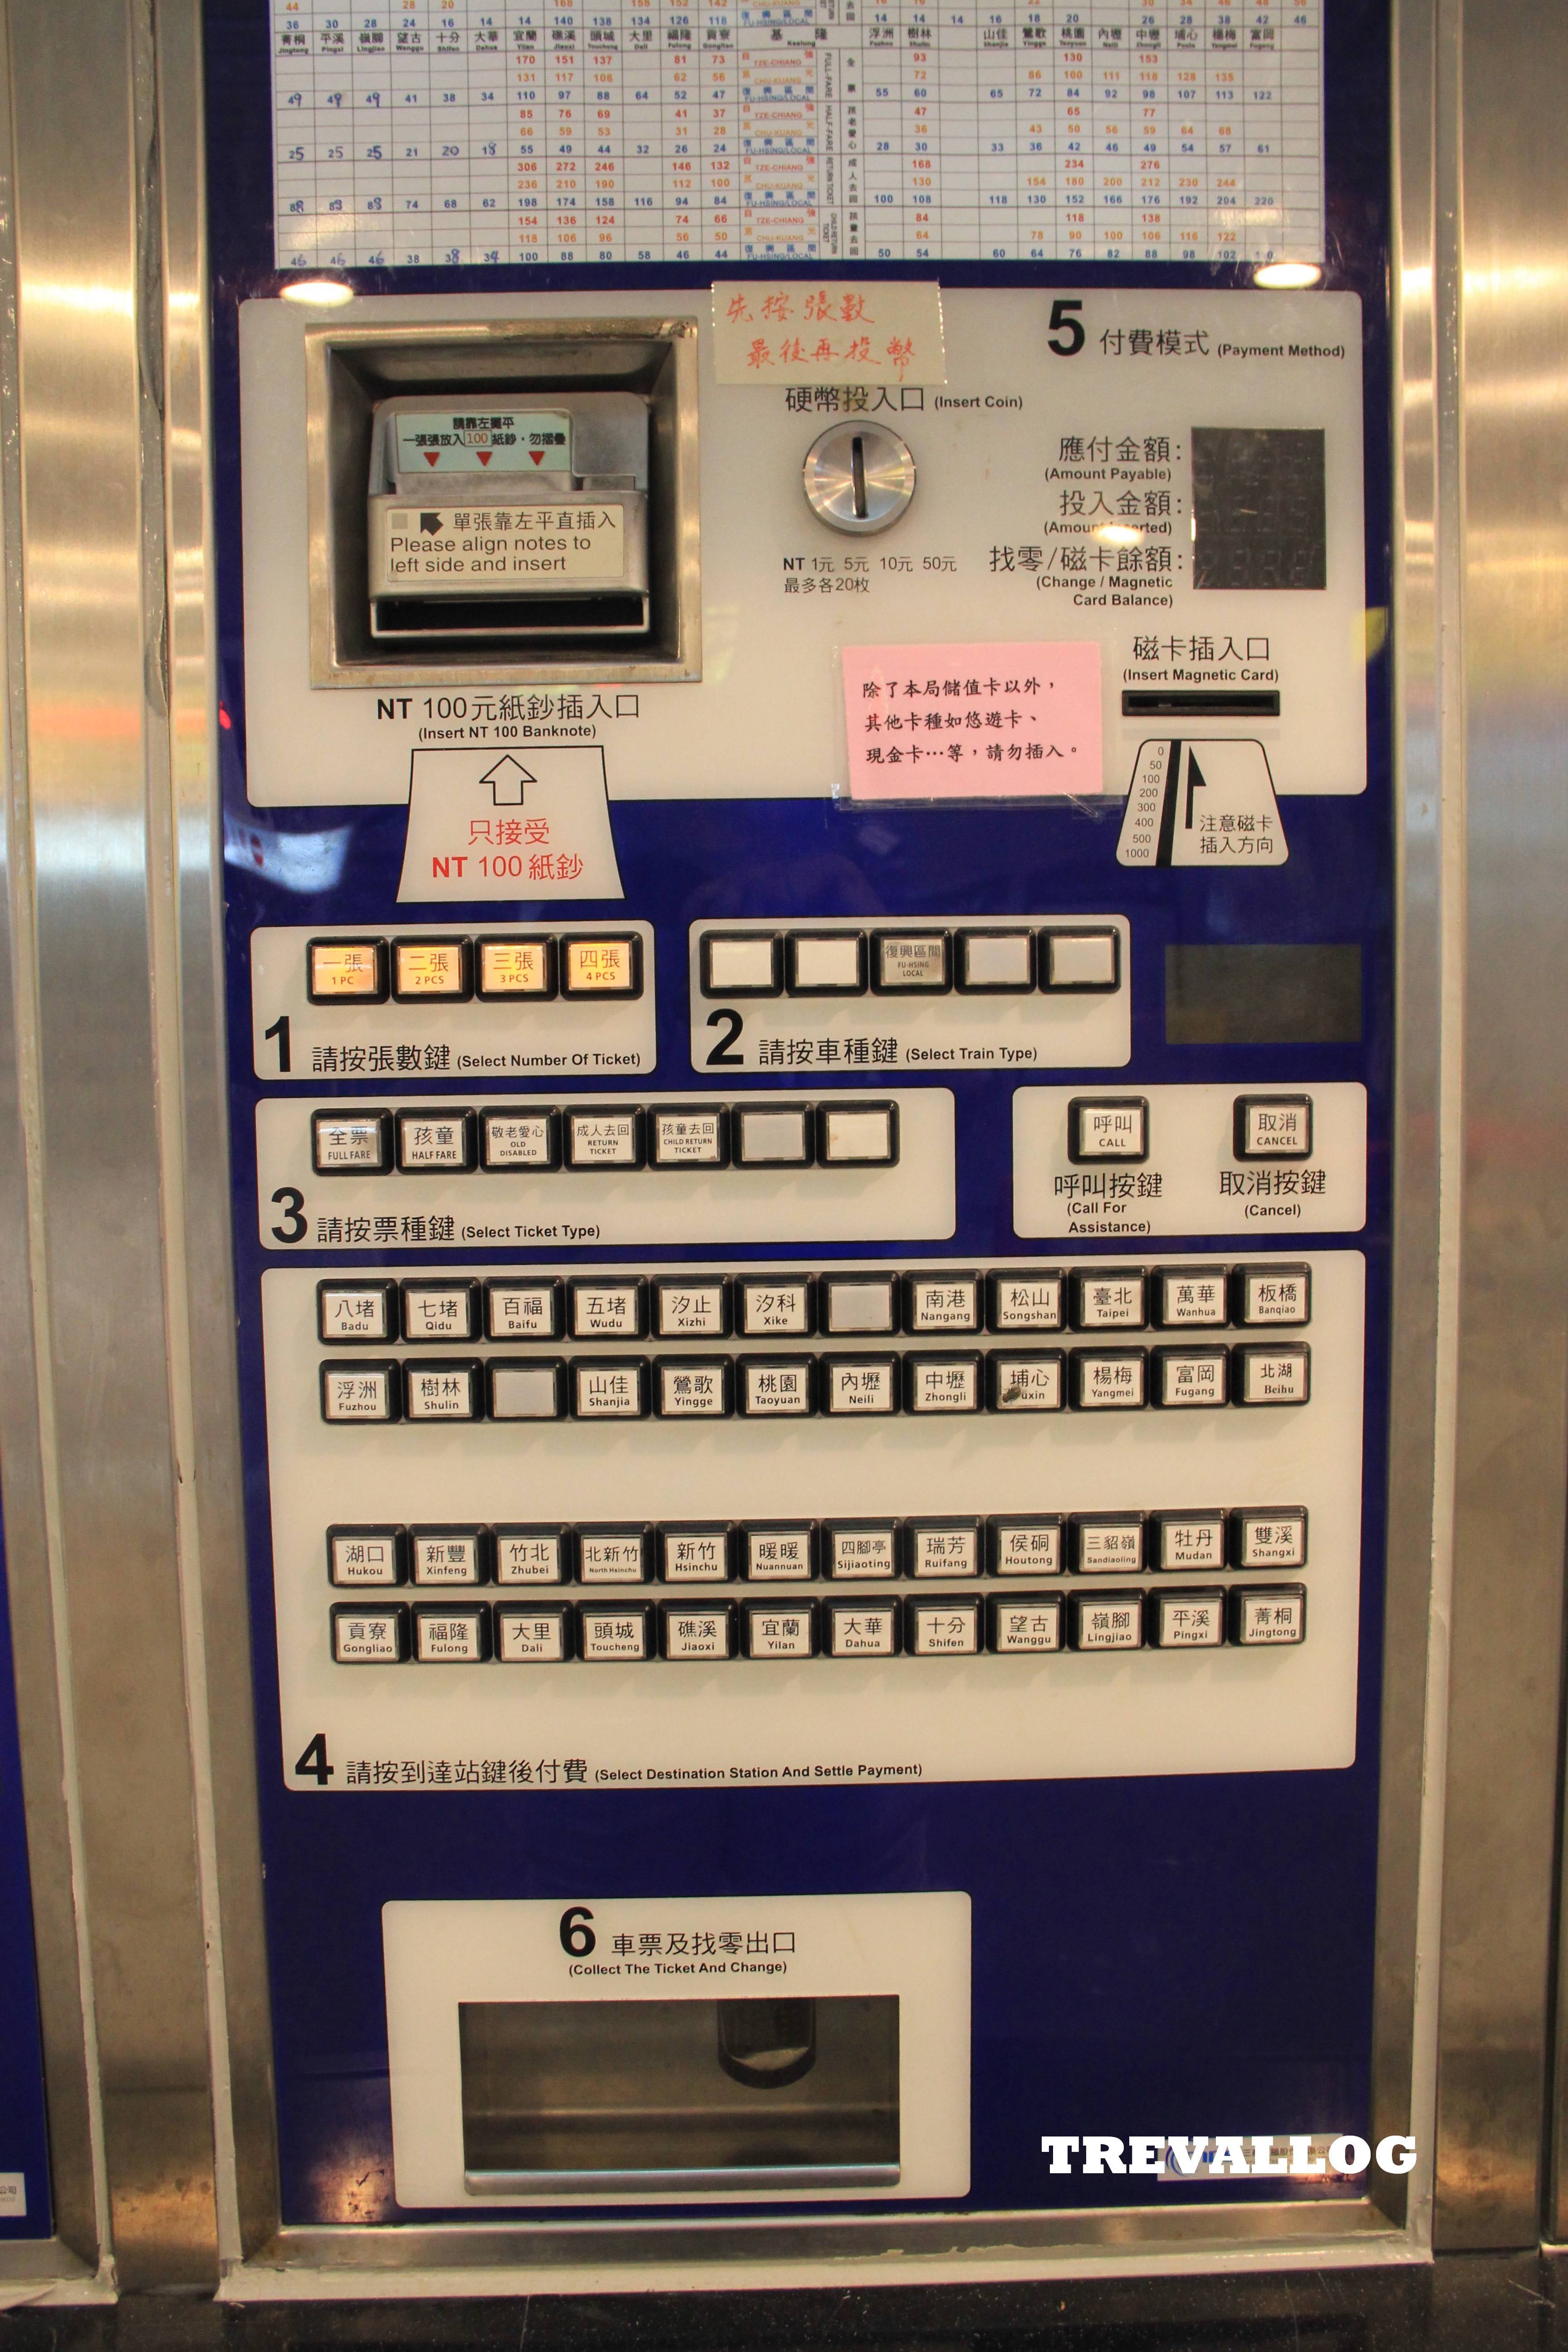 Ticket machine to buy train tickets at Keelung Station, Taiwan